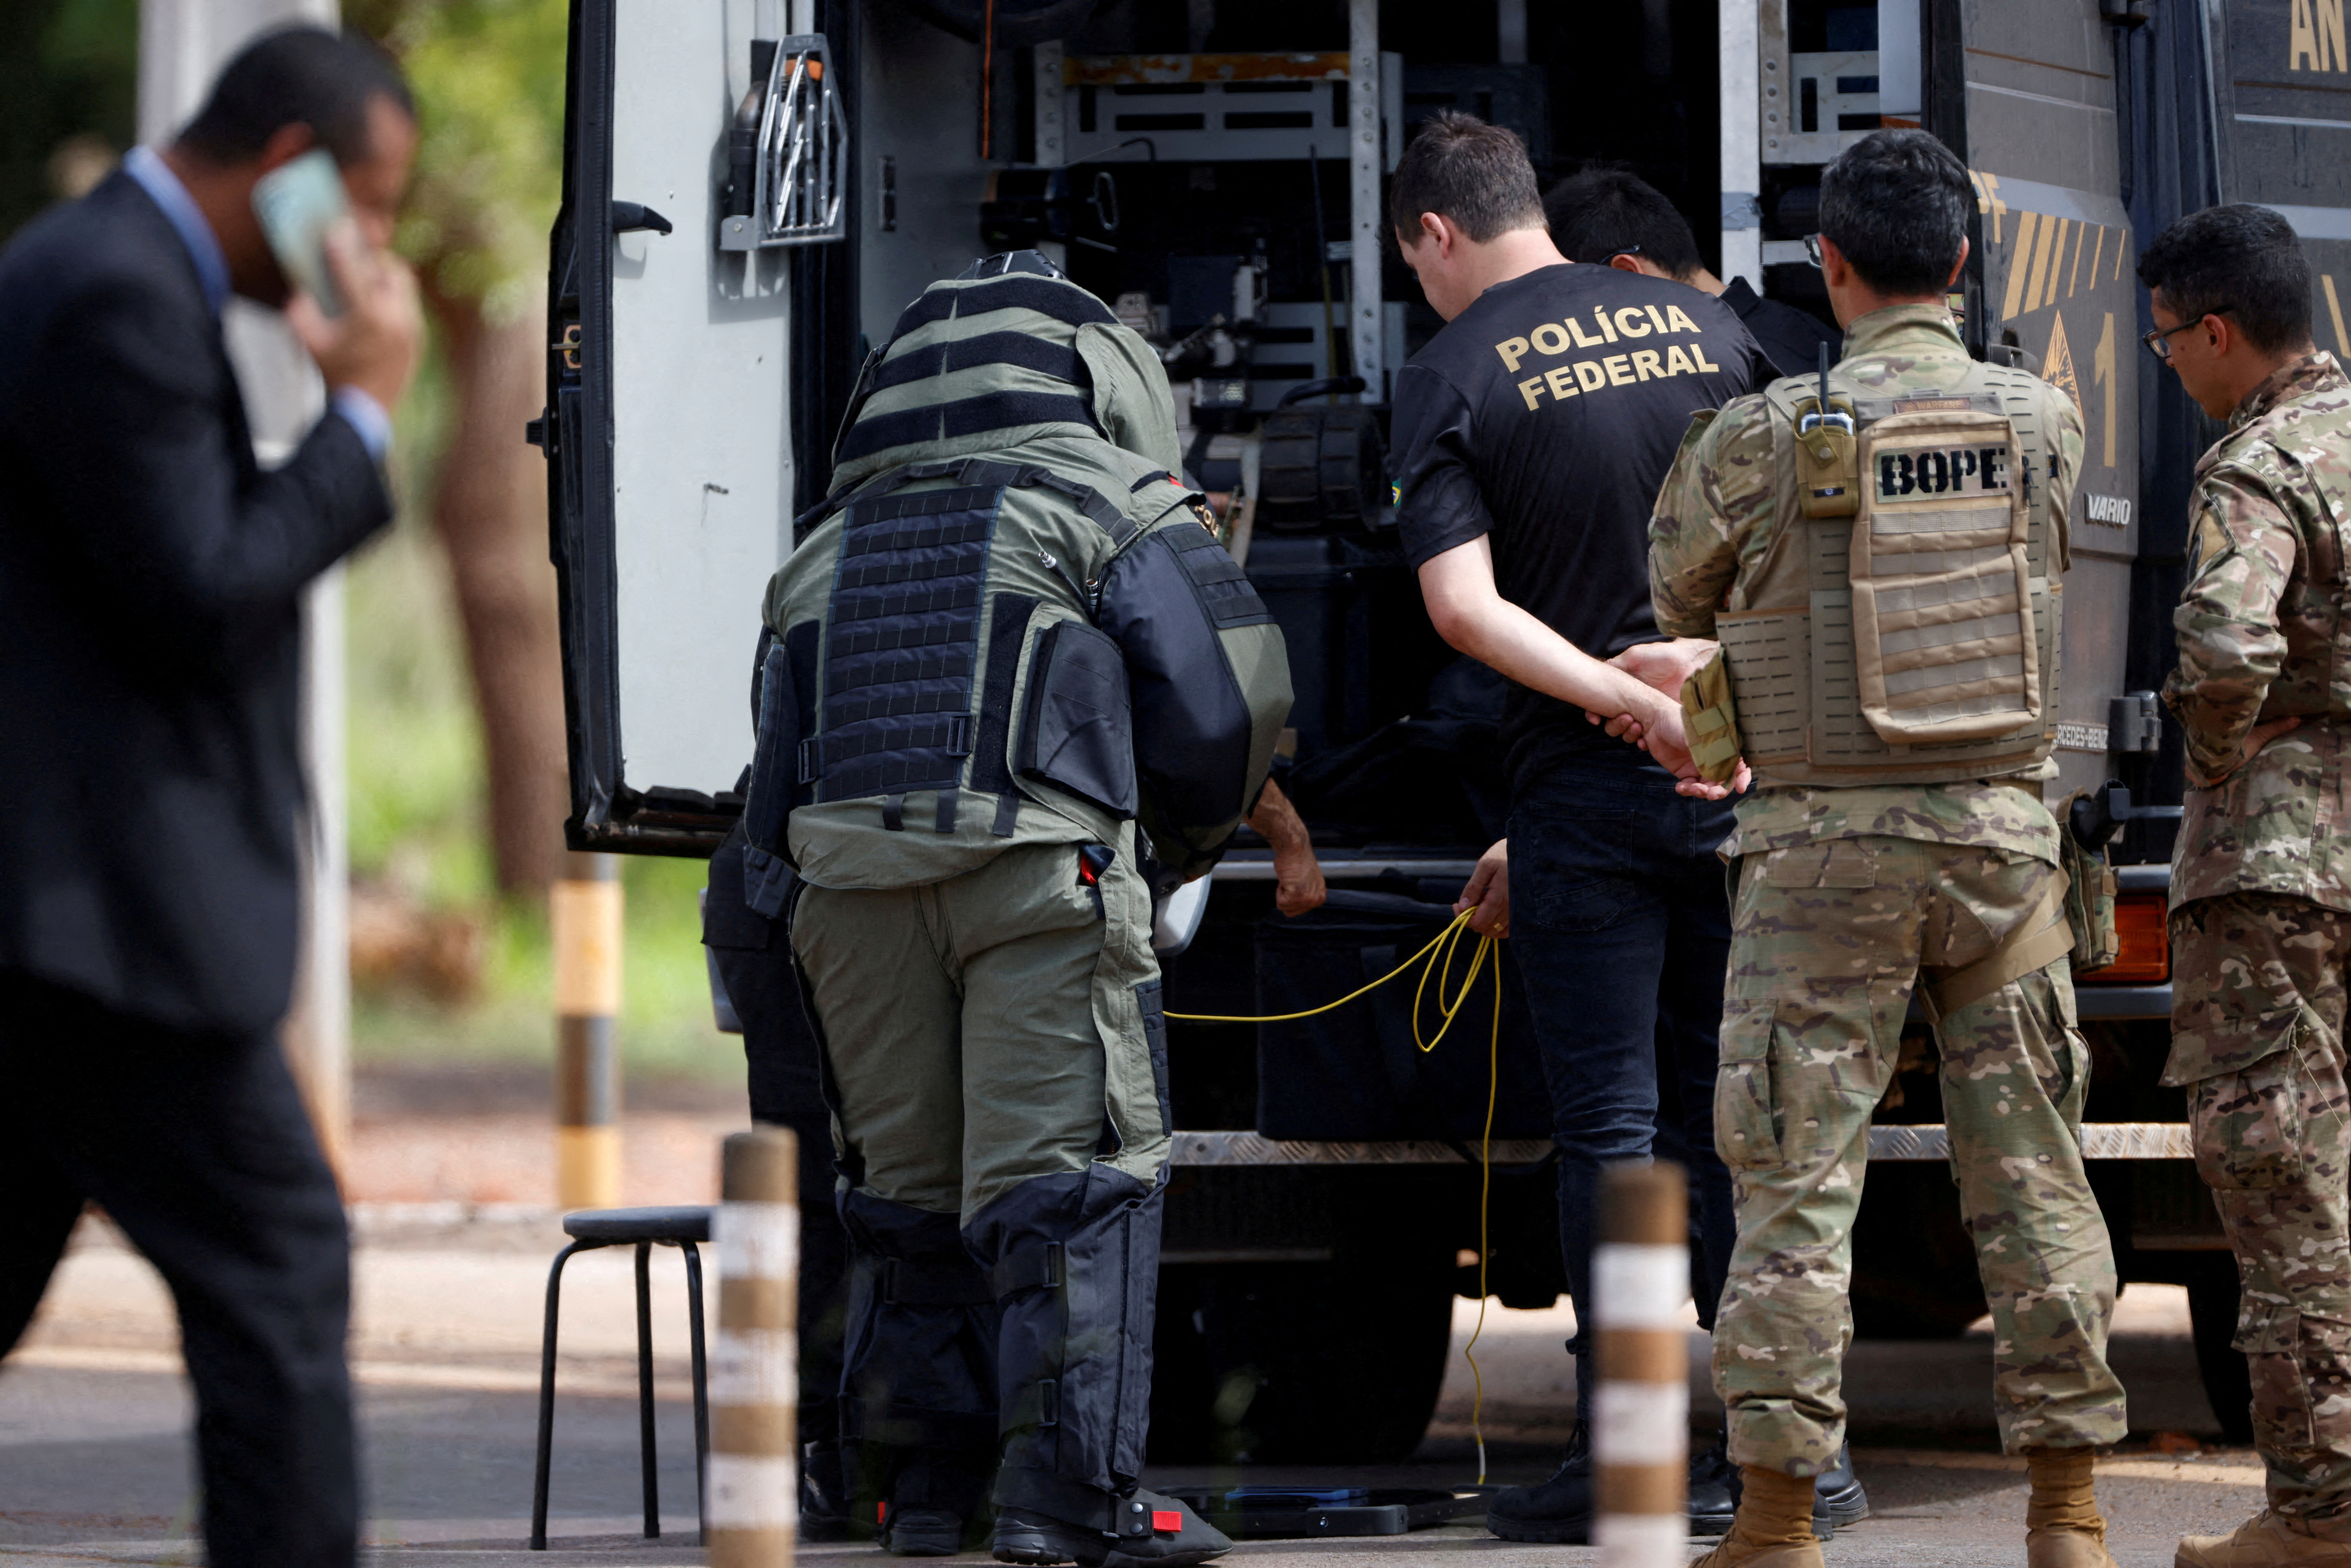 A robot of the federal police bomb squad is seen near what is believed to be an explosive artifact in Brasilia, Brazil